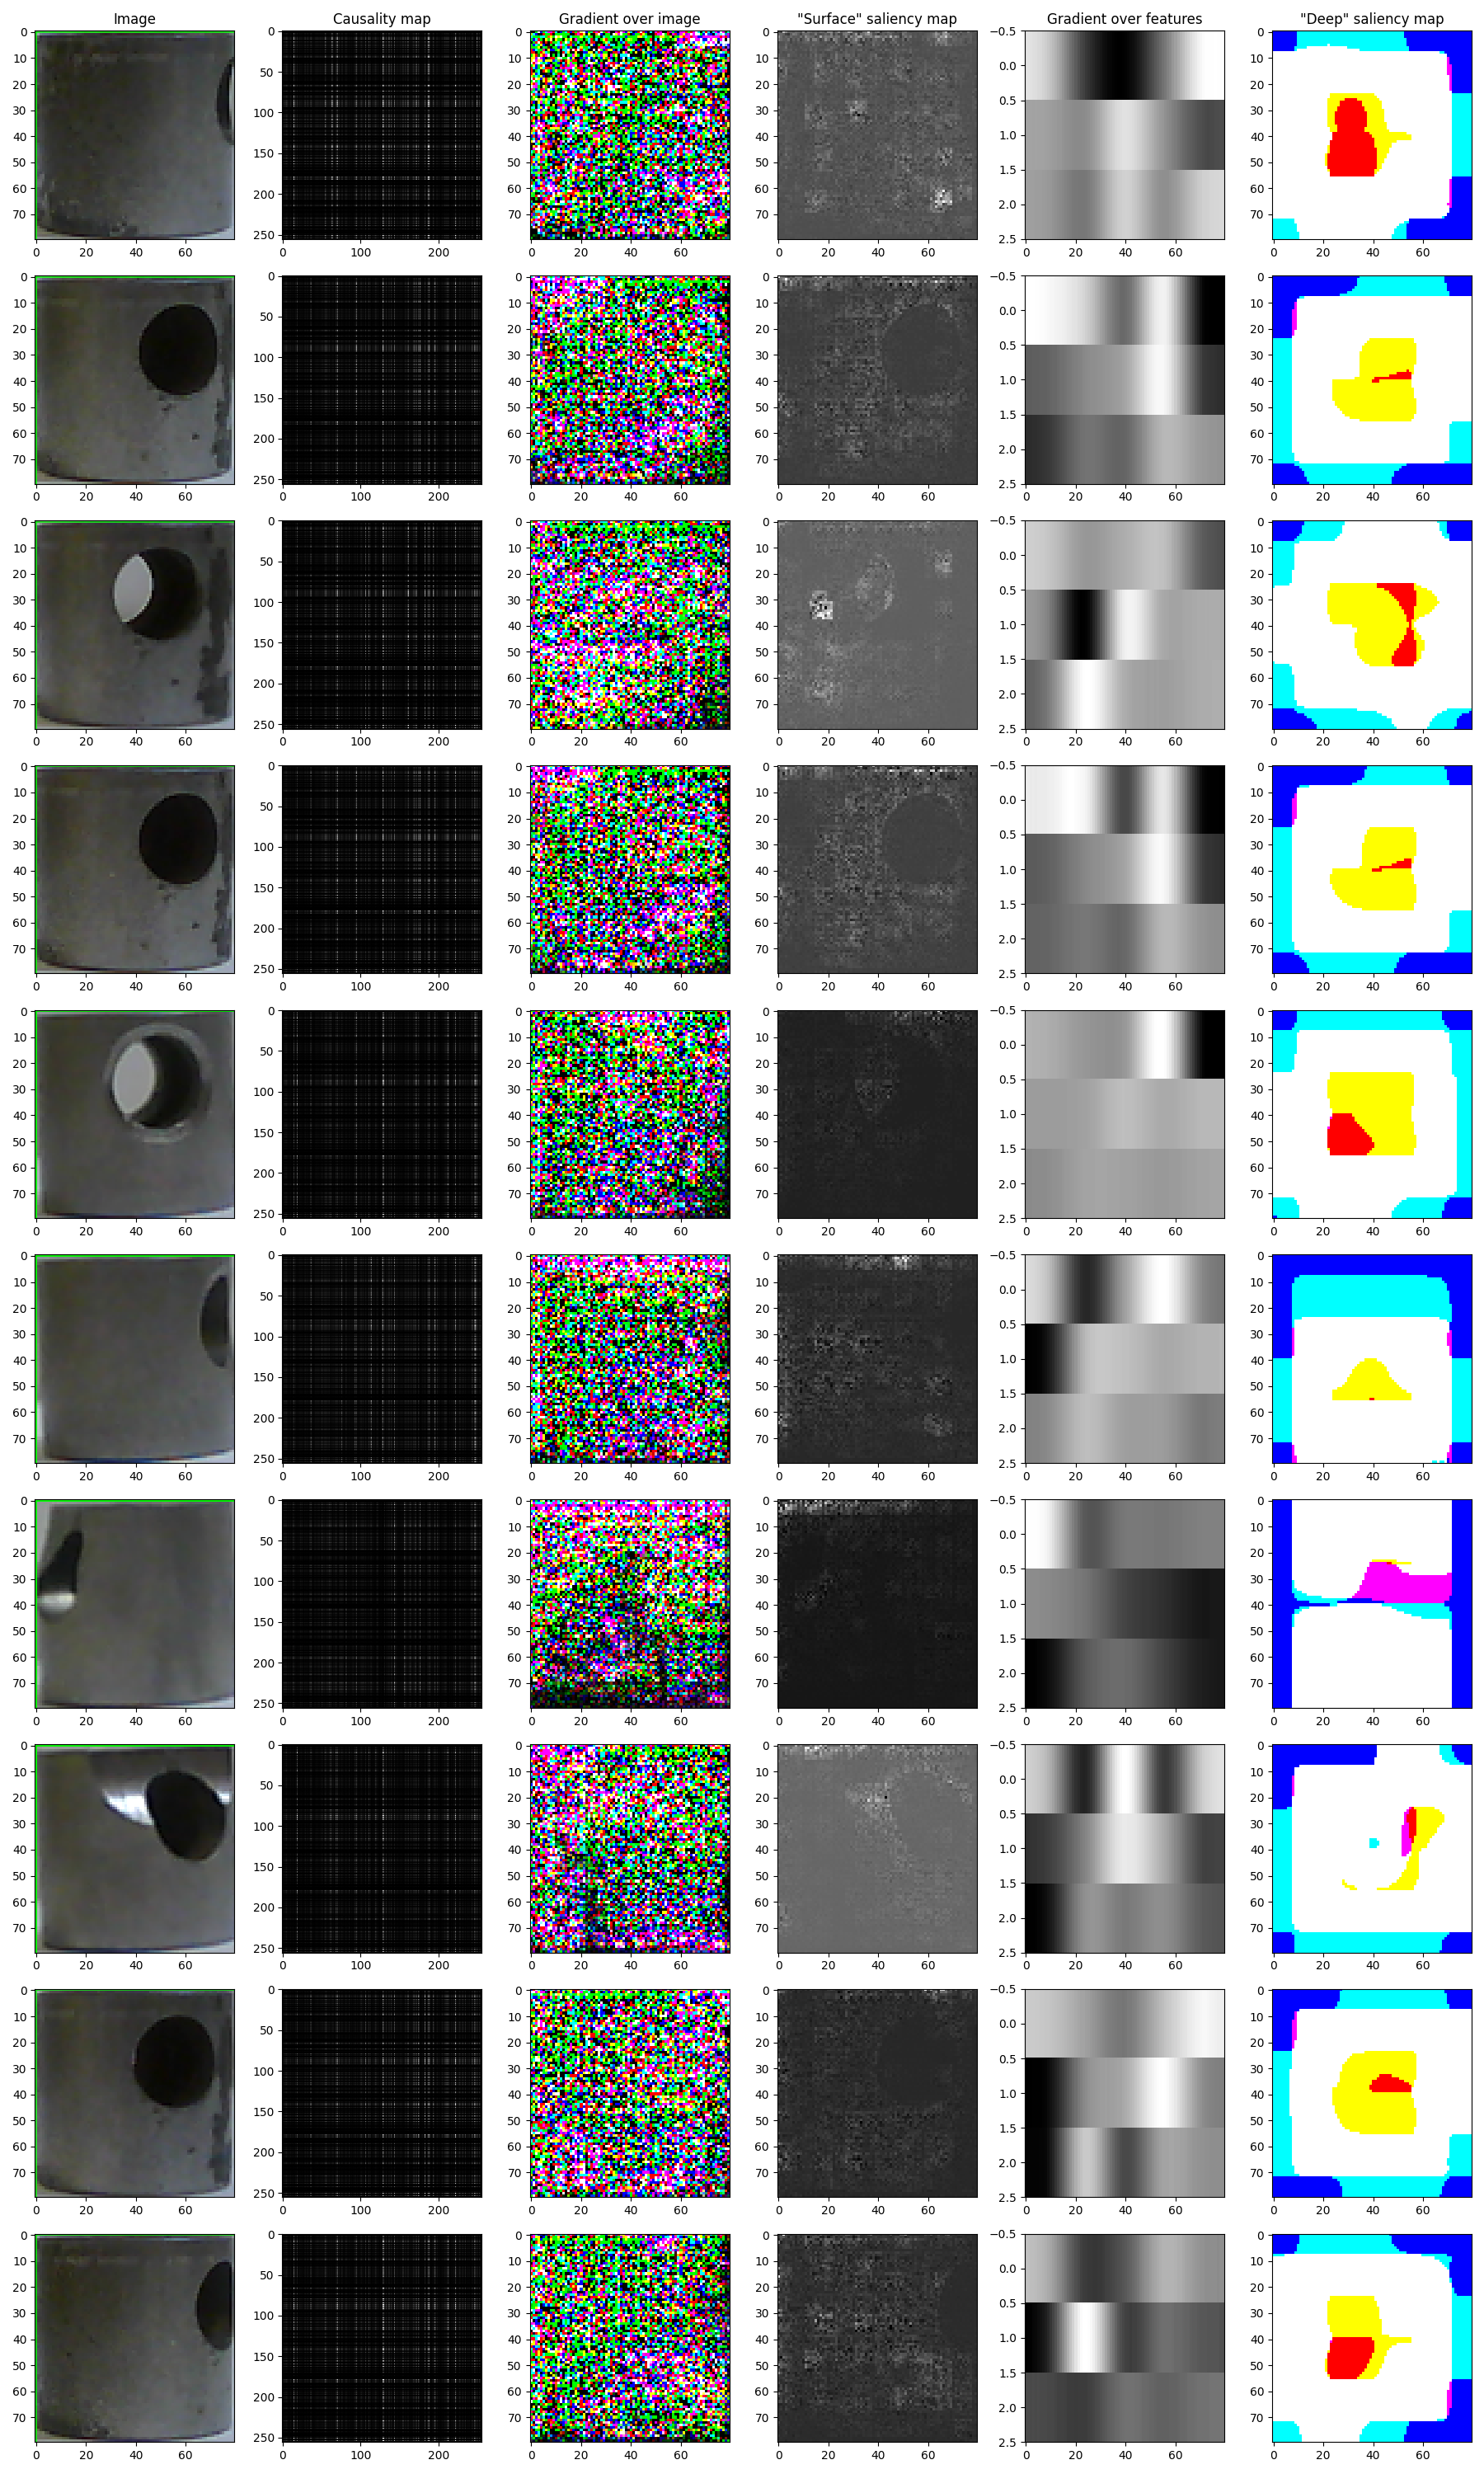 Special saliency maps or "Causal shadows"